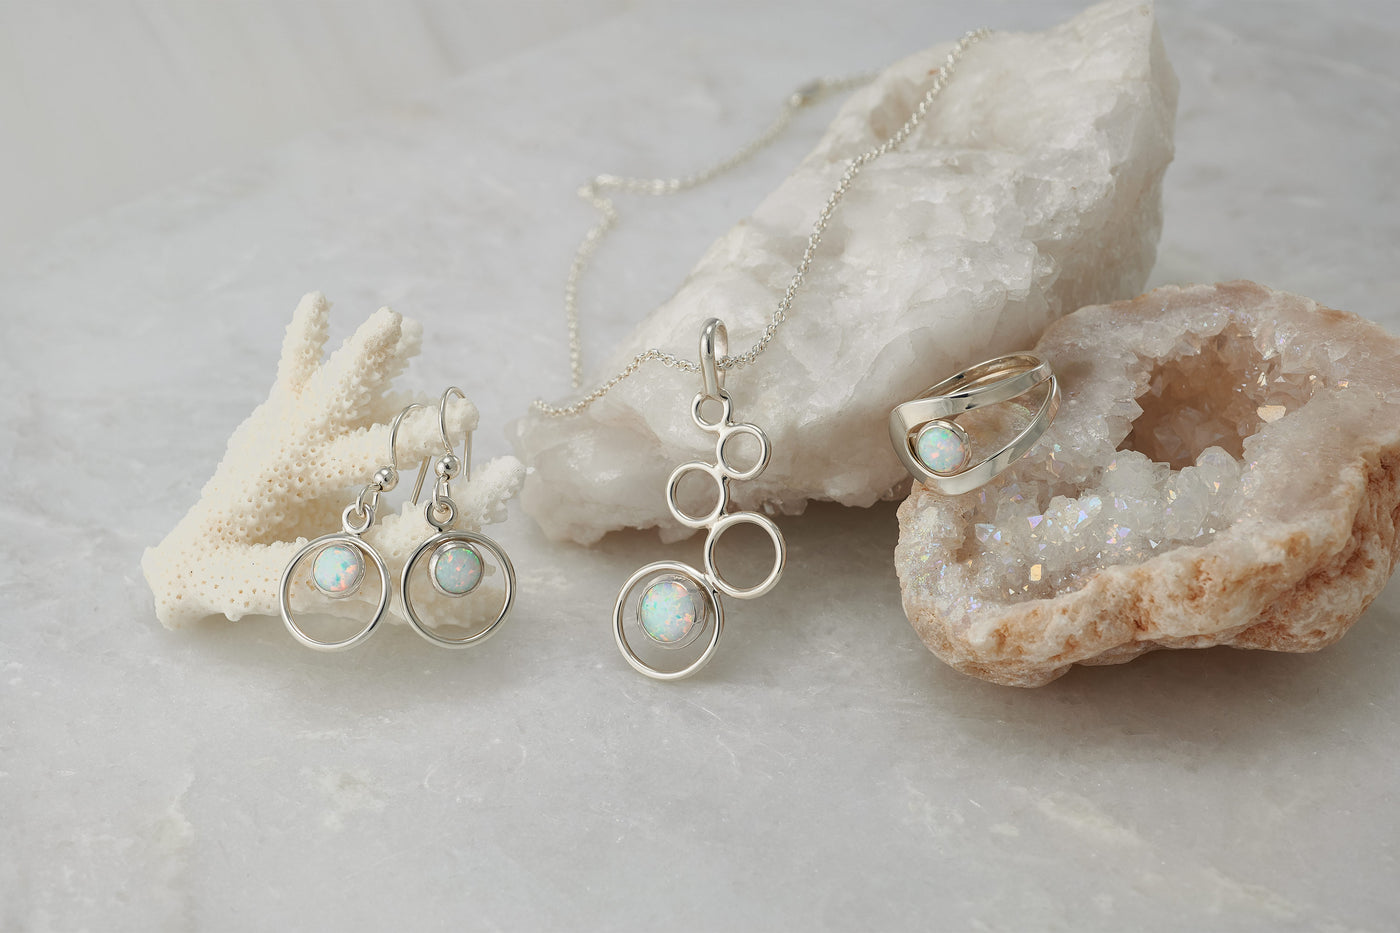 Opal Jewelry set with earrings, necklace, ring